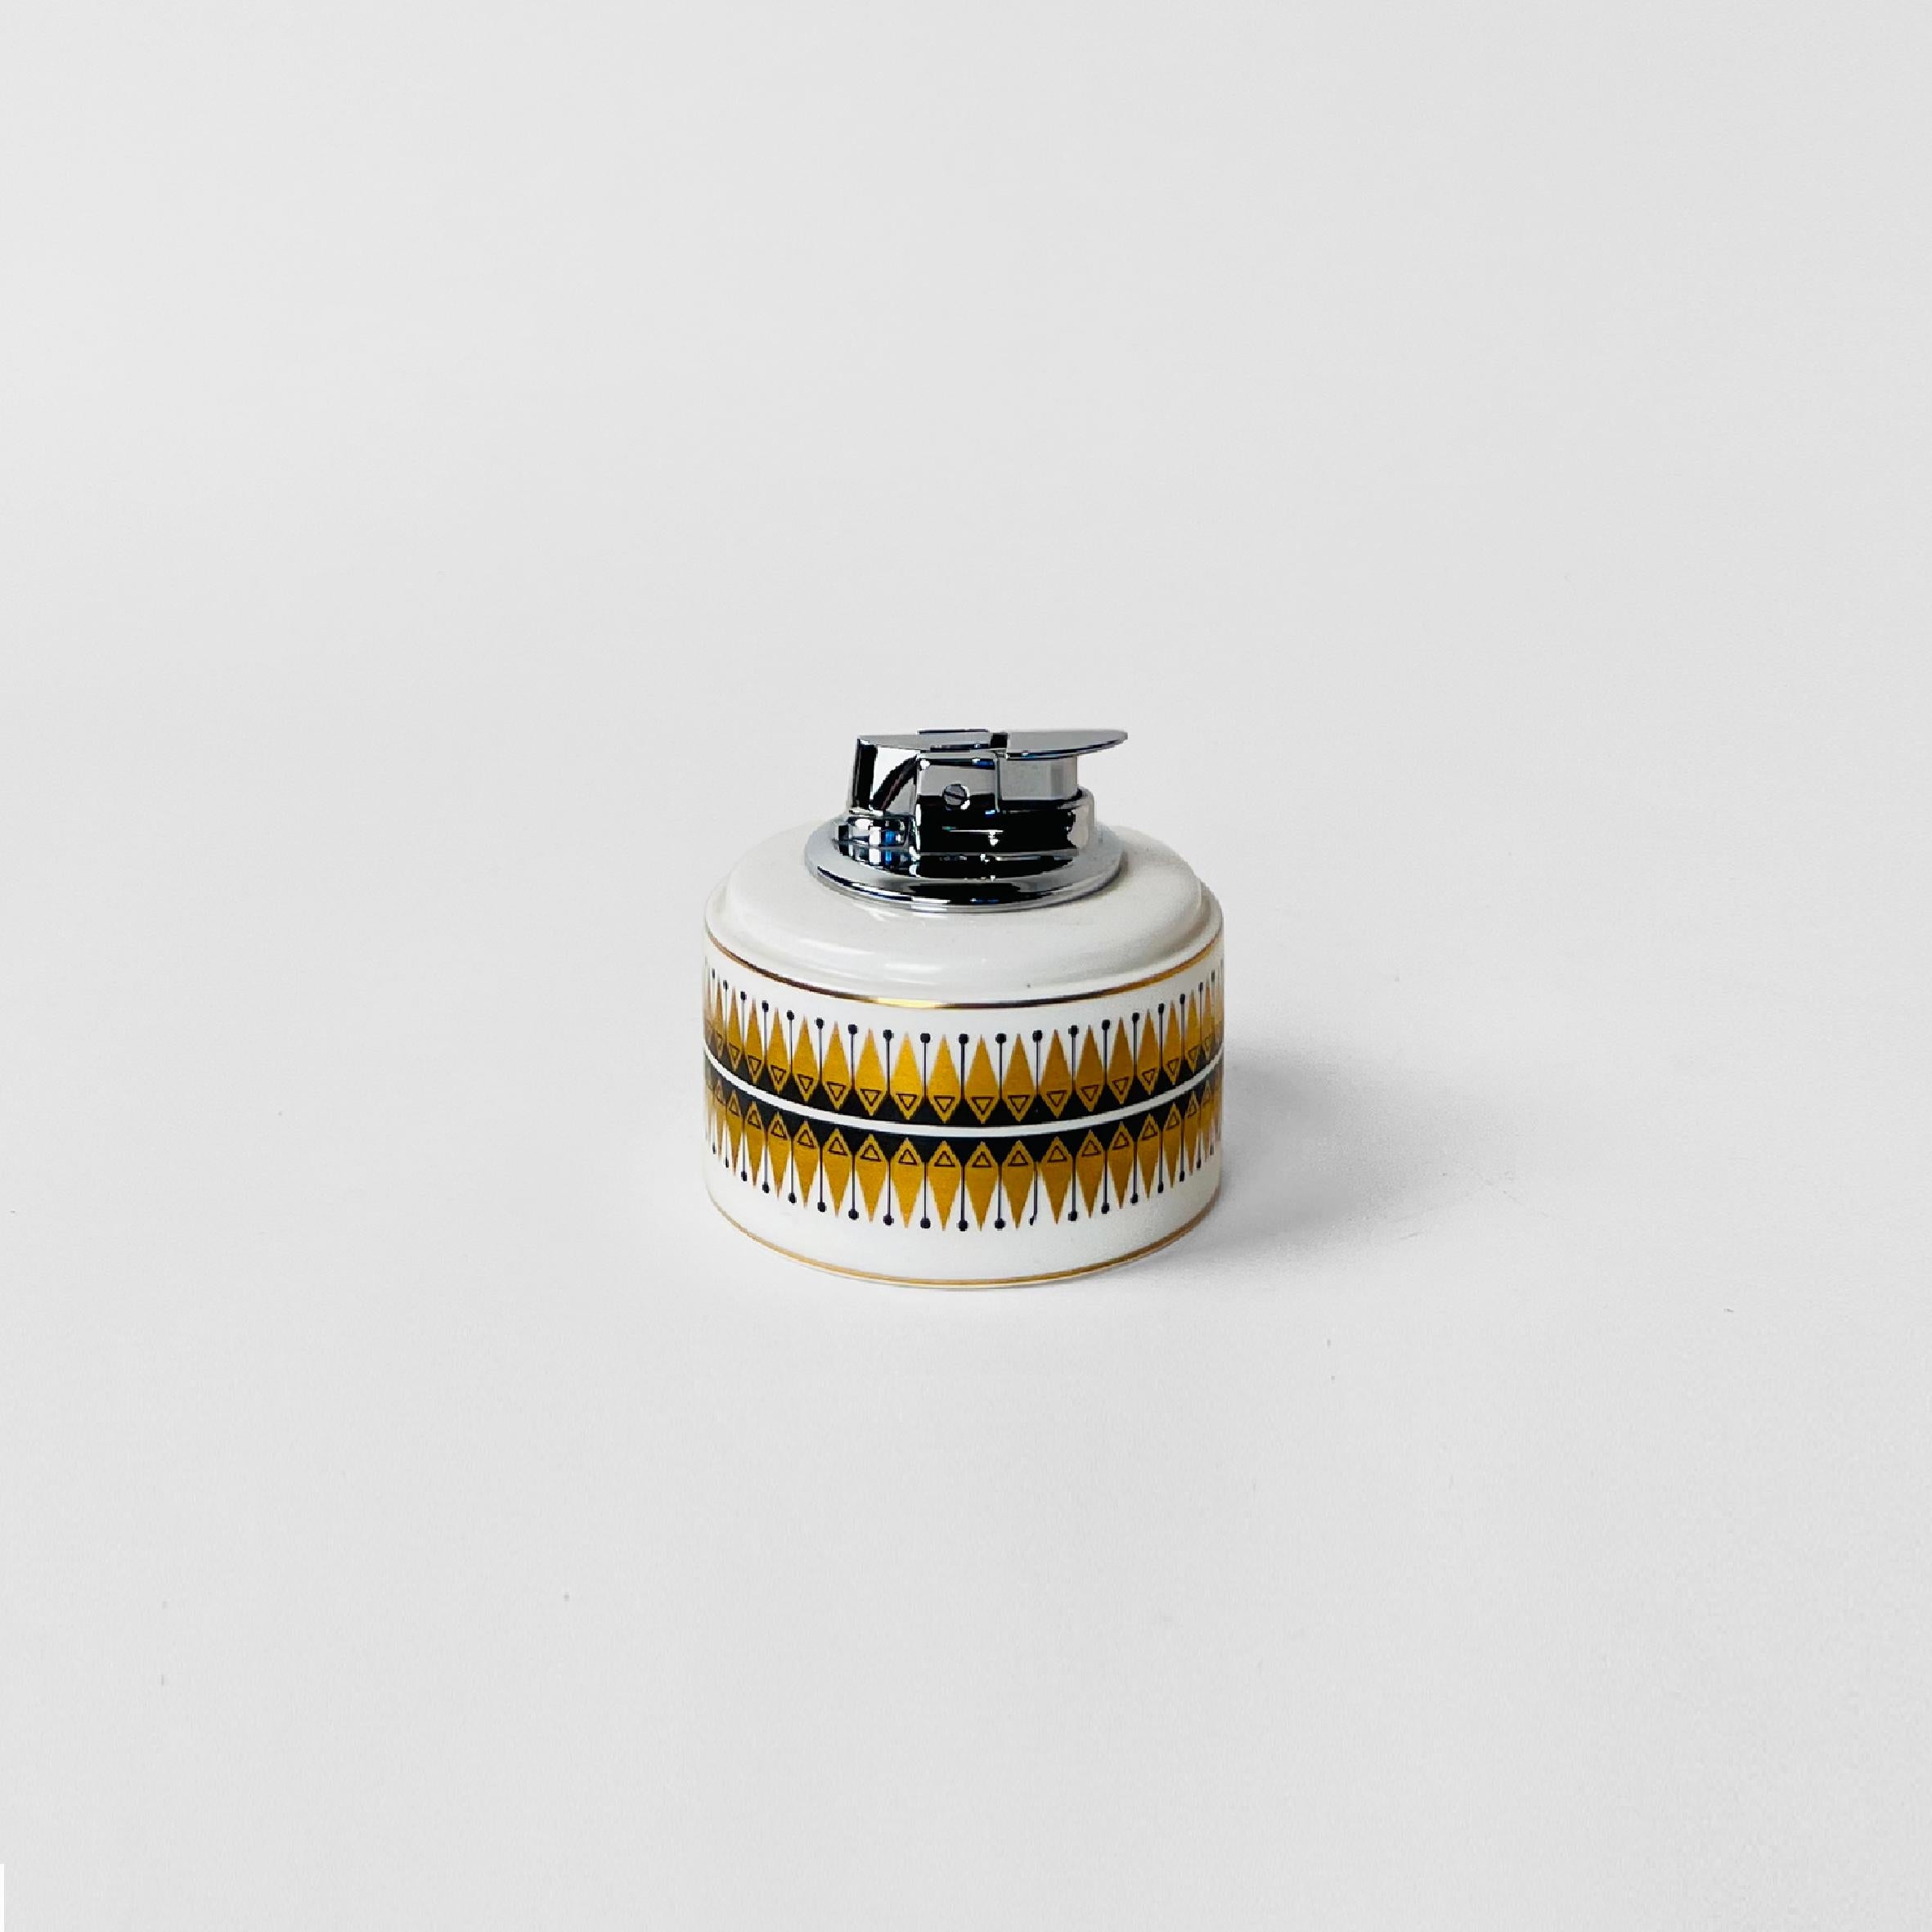 Rare porcelain Wedgwood table lighter. Shows a retro pattern in black and gold. Made in England, circa 1960.